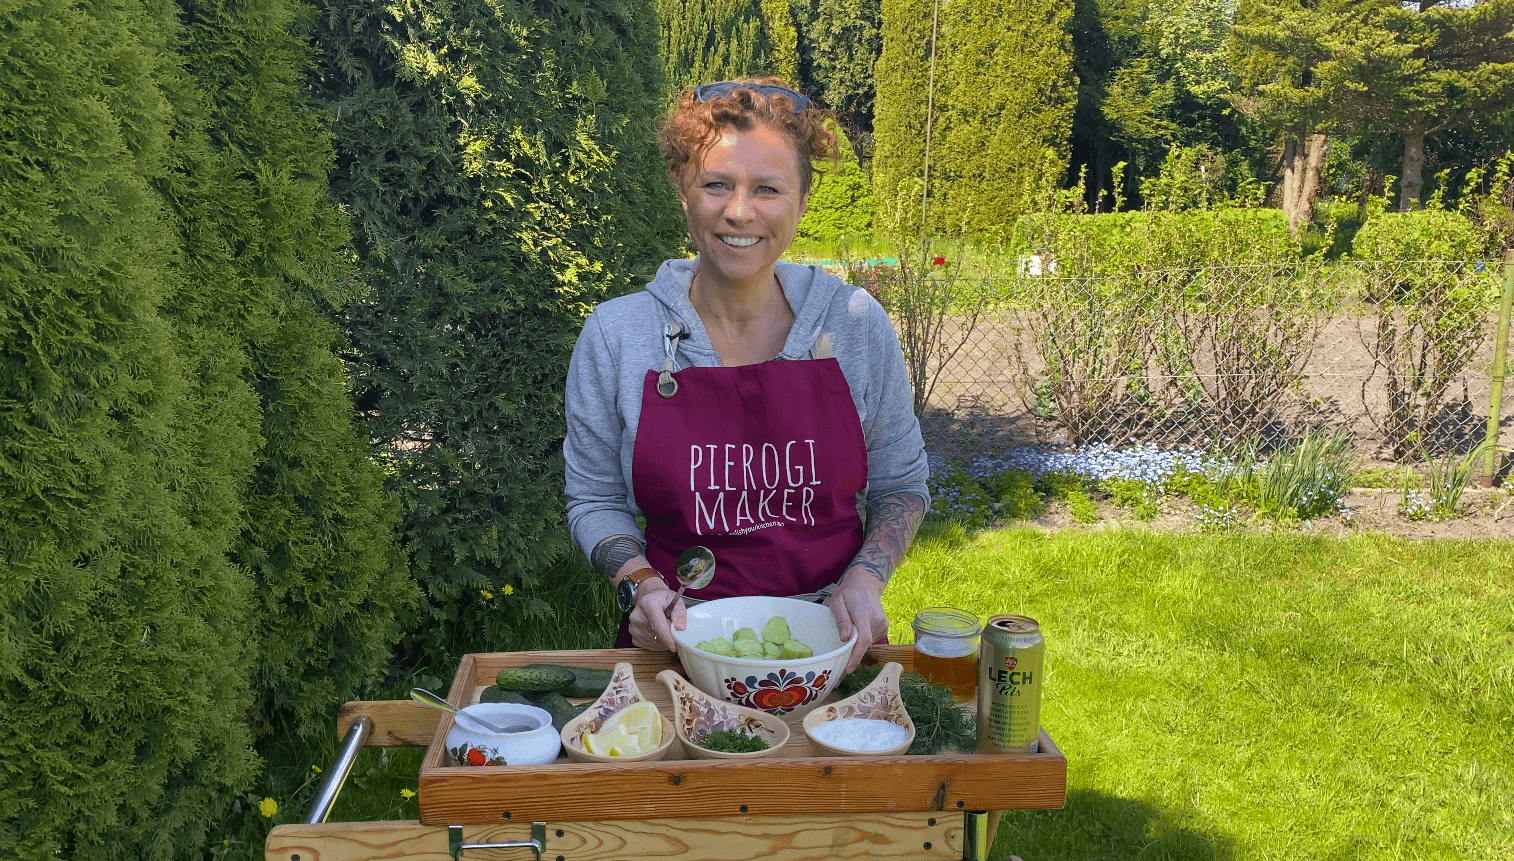 Polish Your Kitchen - MEET ANNA Welcome to my Polish food blog! Here, I  share memories of growing up in Poland in the 80s and 90s, and Polish food  and customs patiently